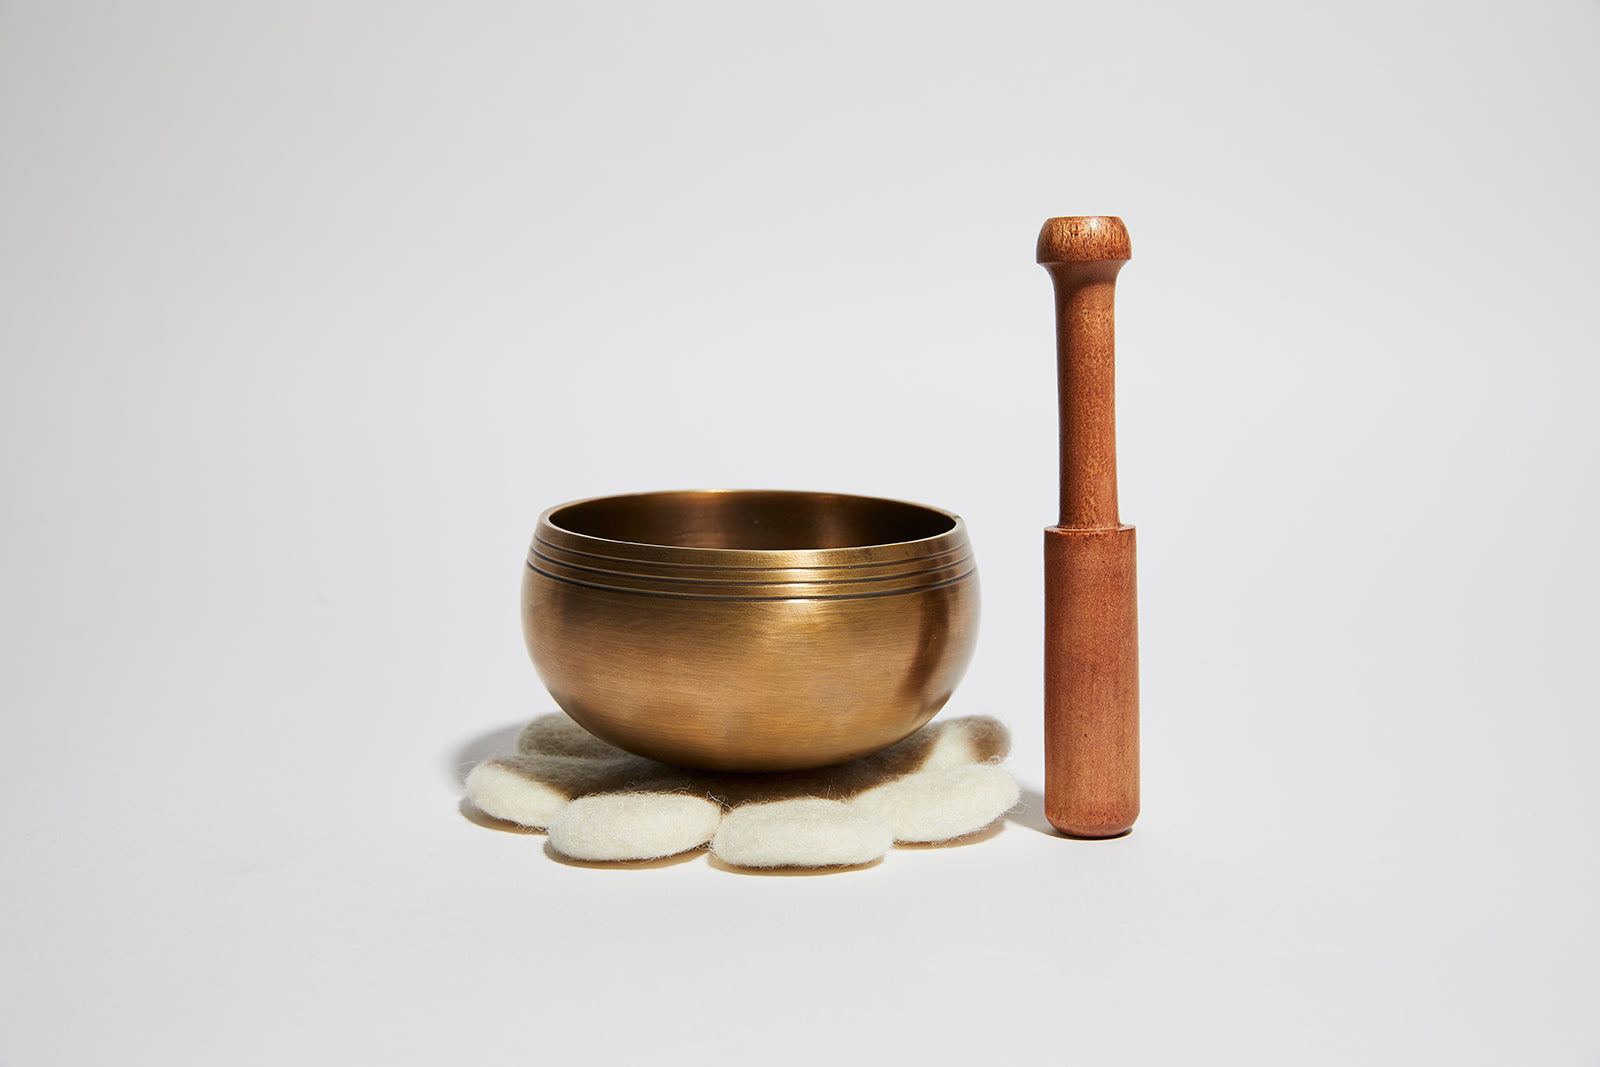 The Three Little Ohmies: Set of Three Bronze Singing Bowls Made Just For Children